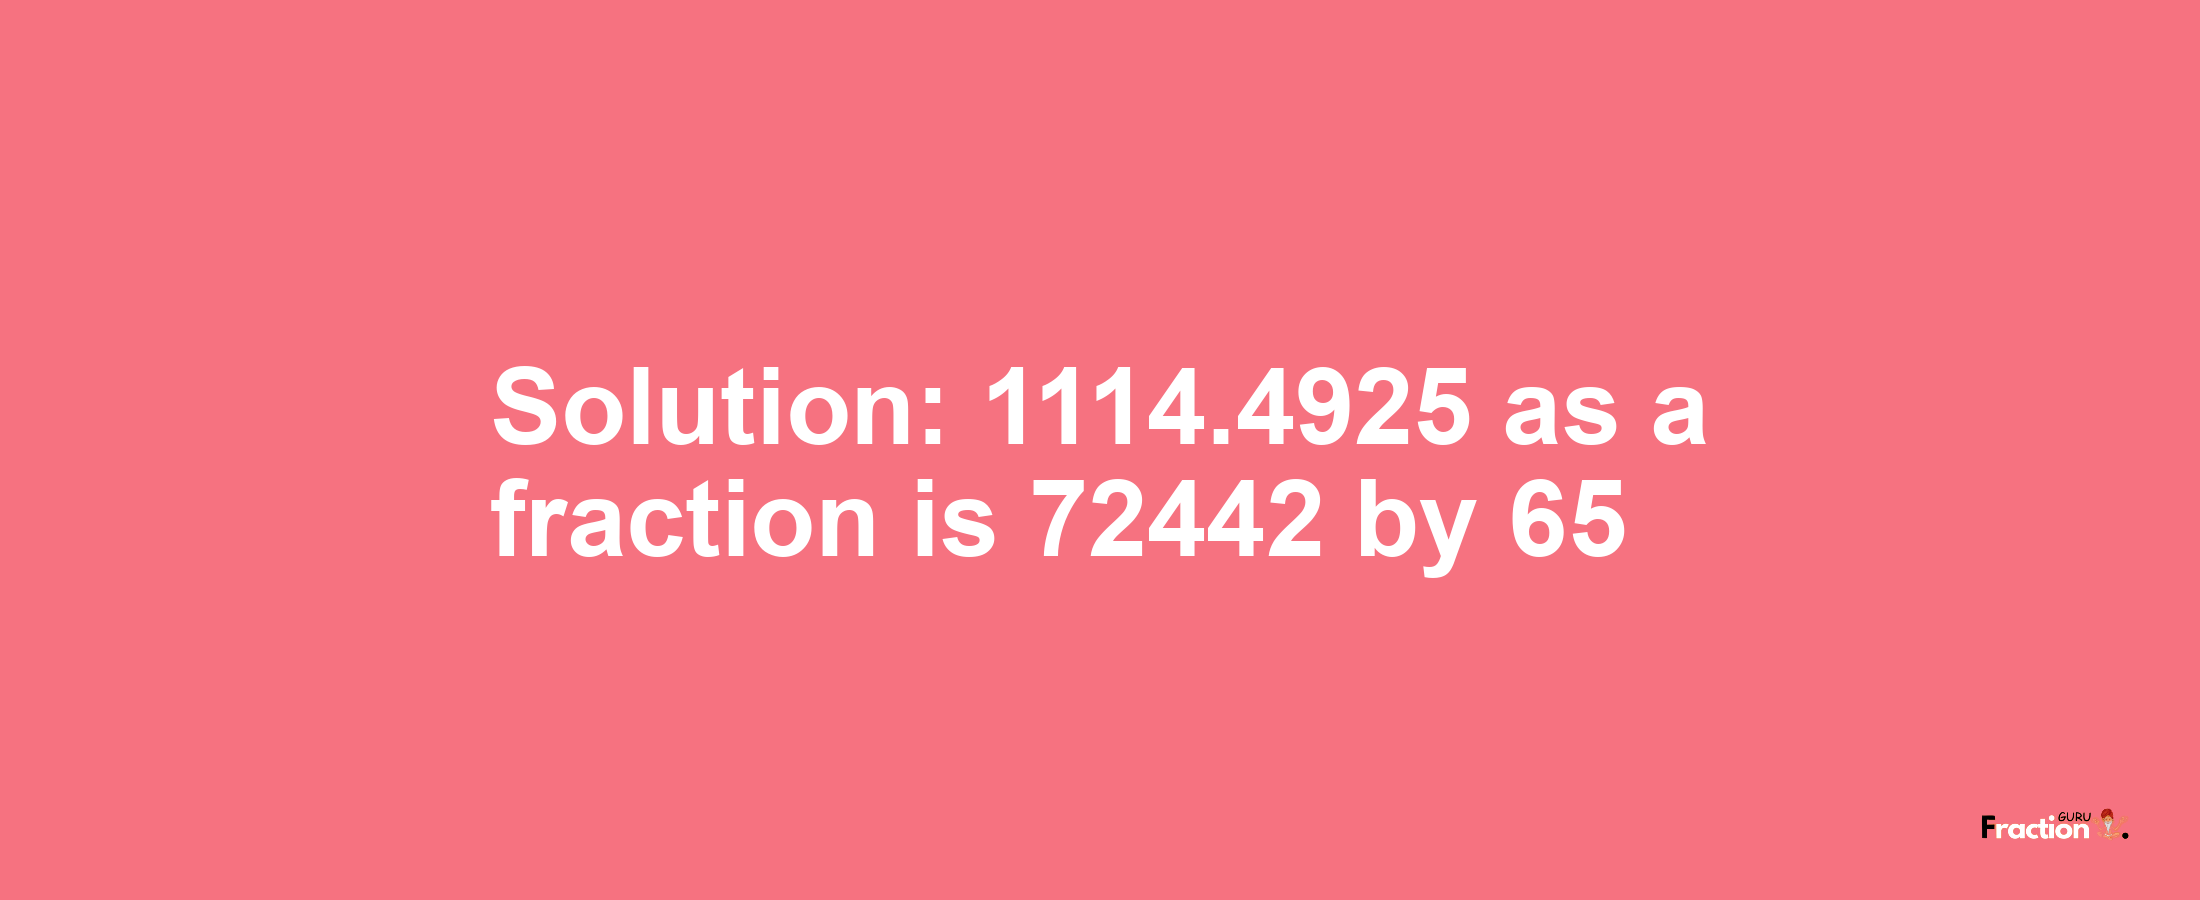 Solution:1114.4925 as a fraction is 72442/65